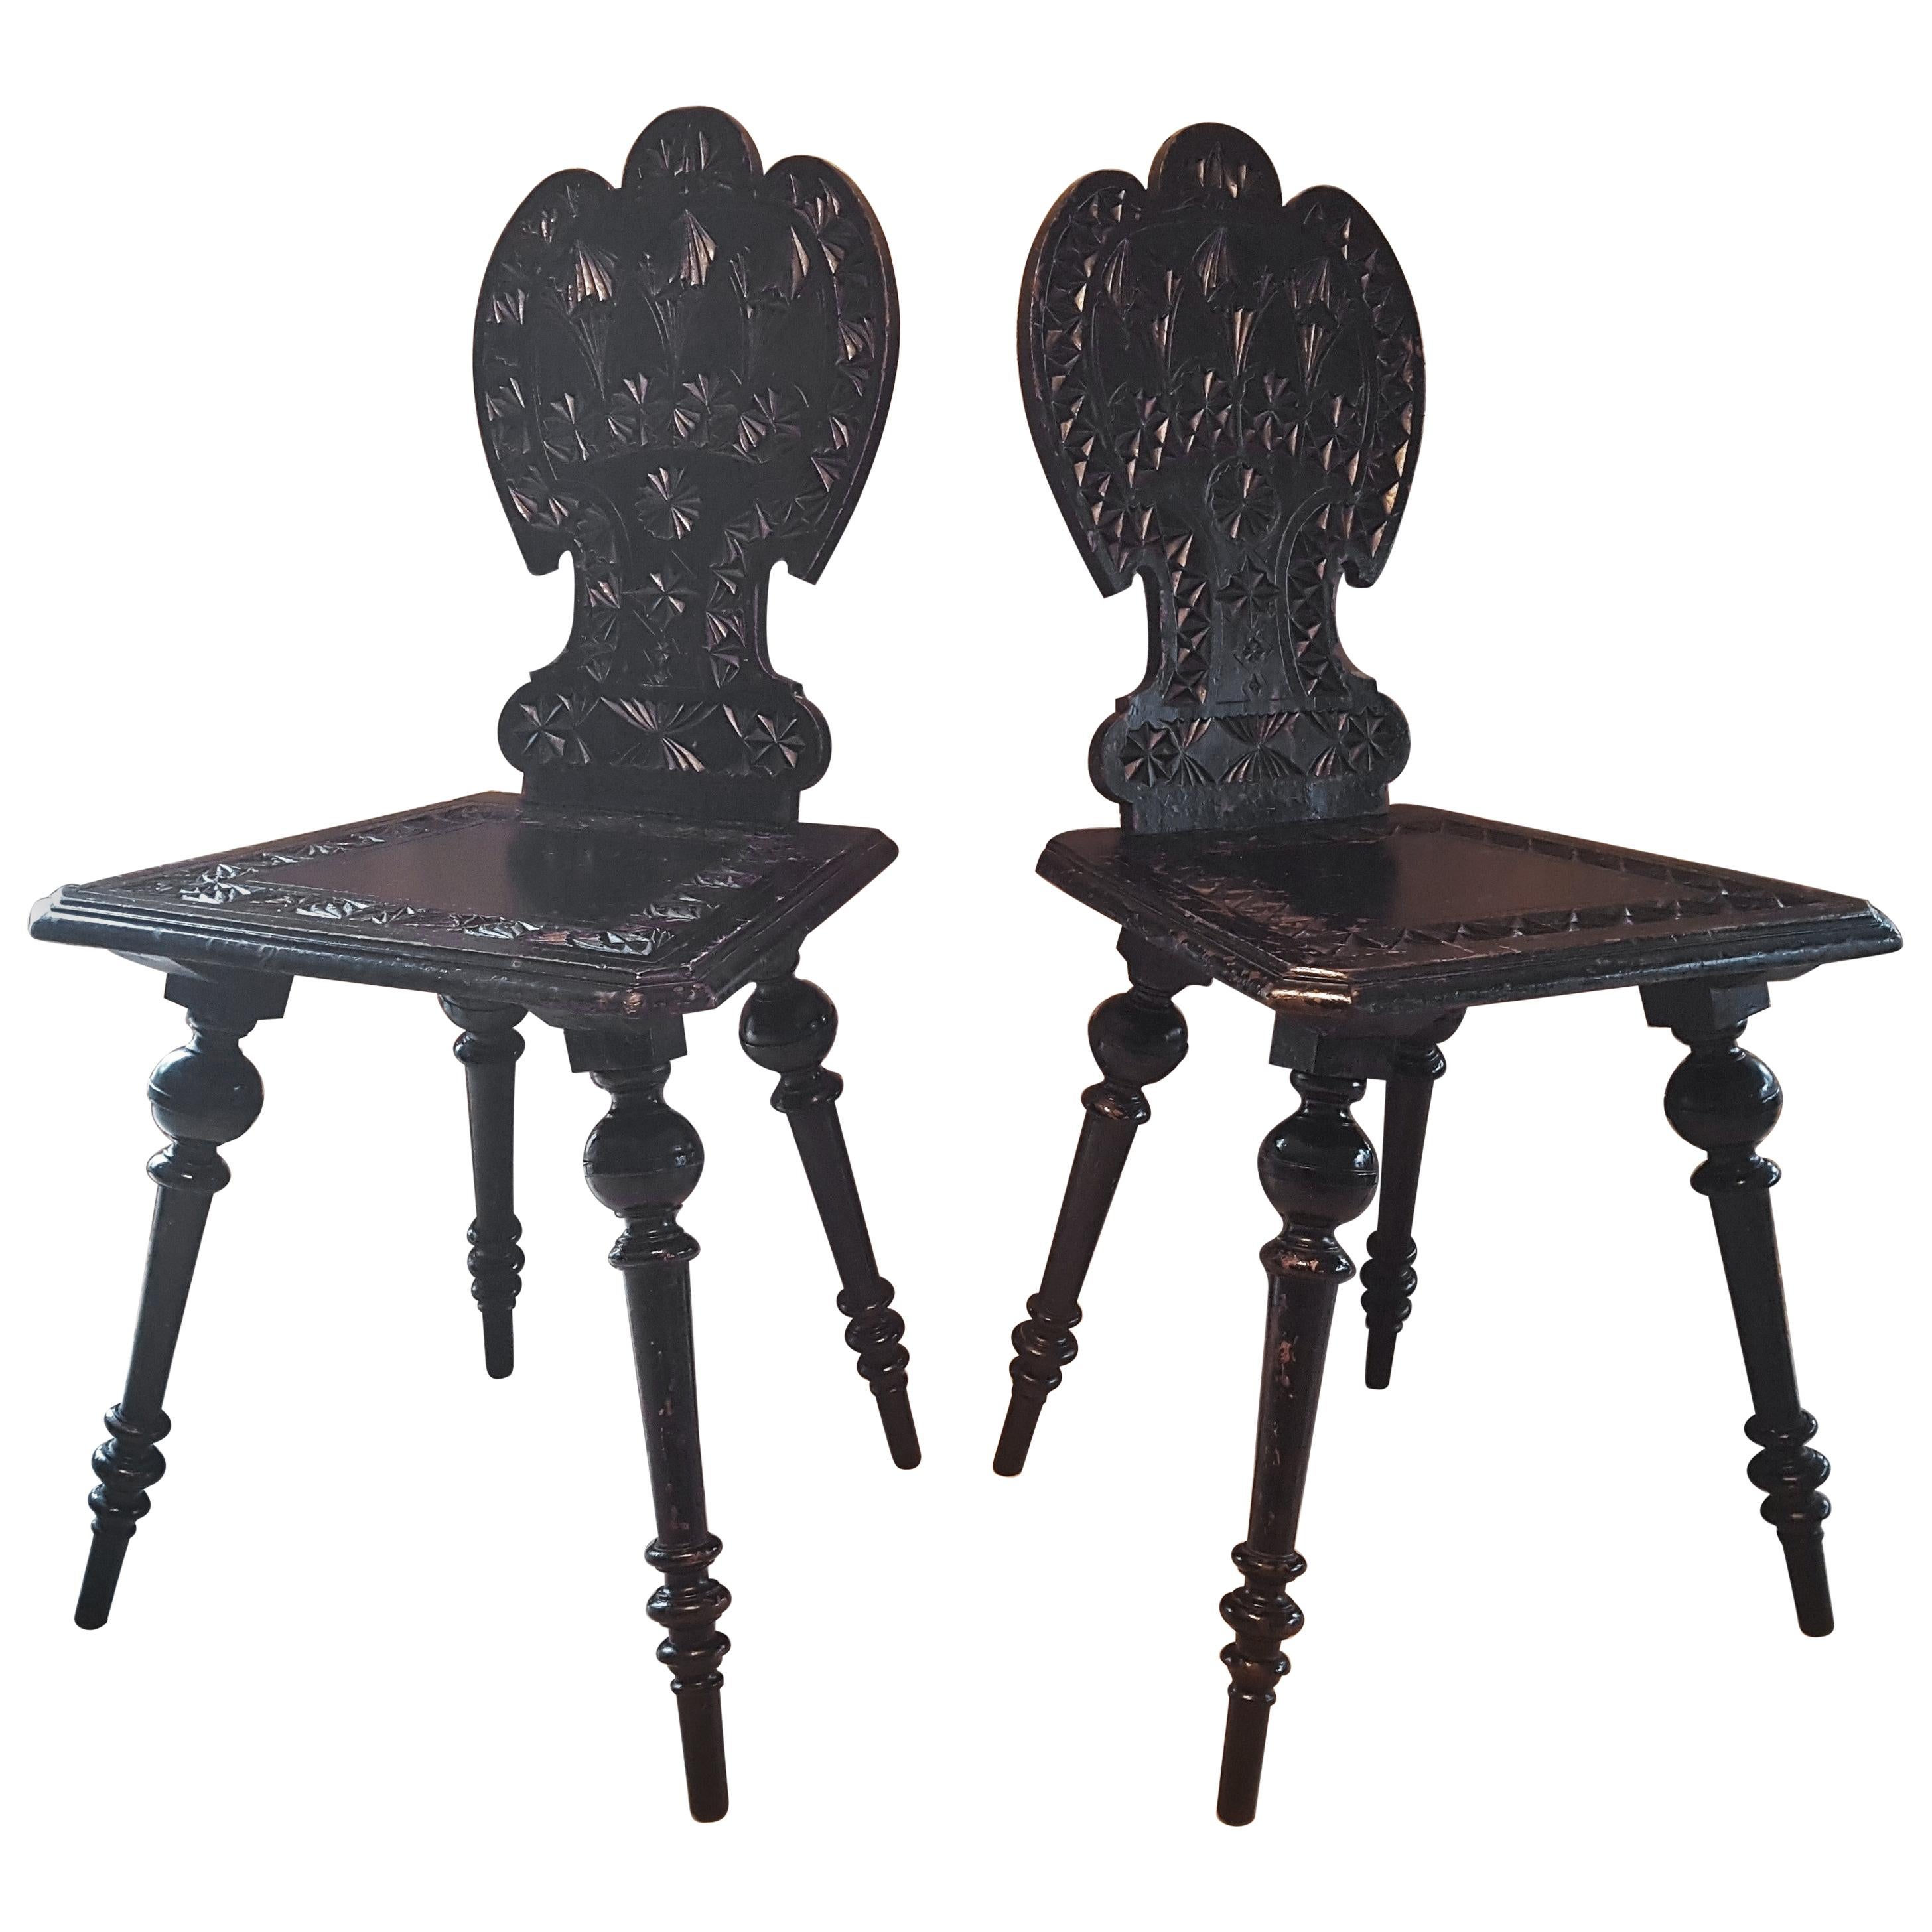 Pair of 19th Century Primitive Rustic Minimal Carved Wood Board Chairs For Sale